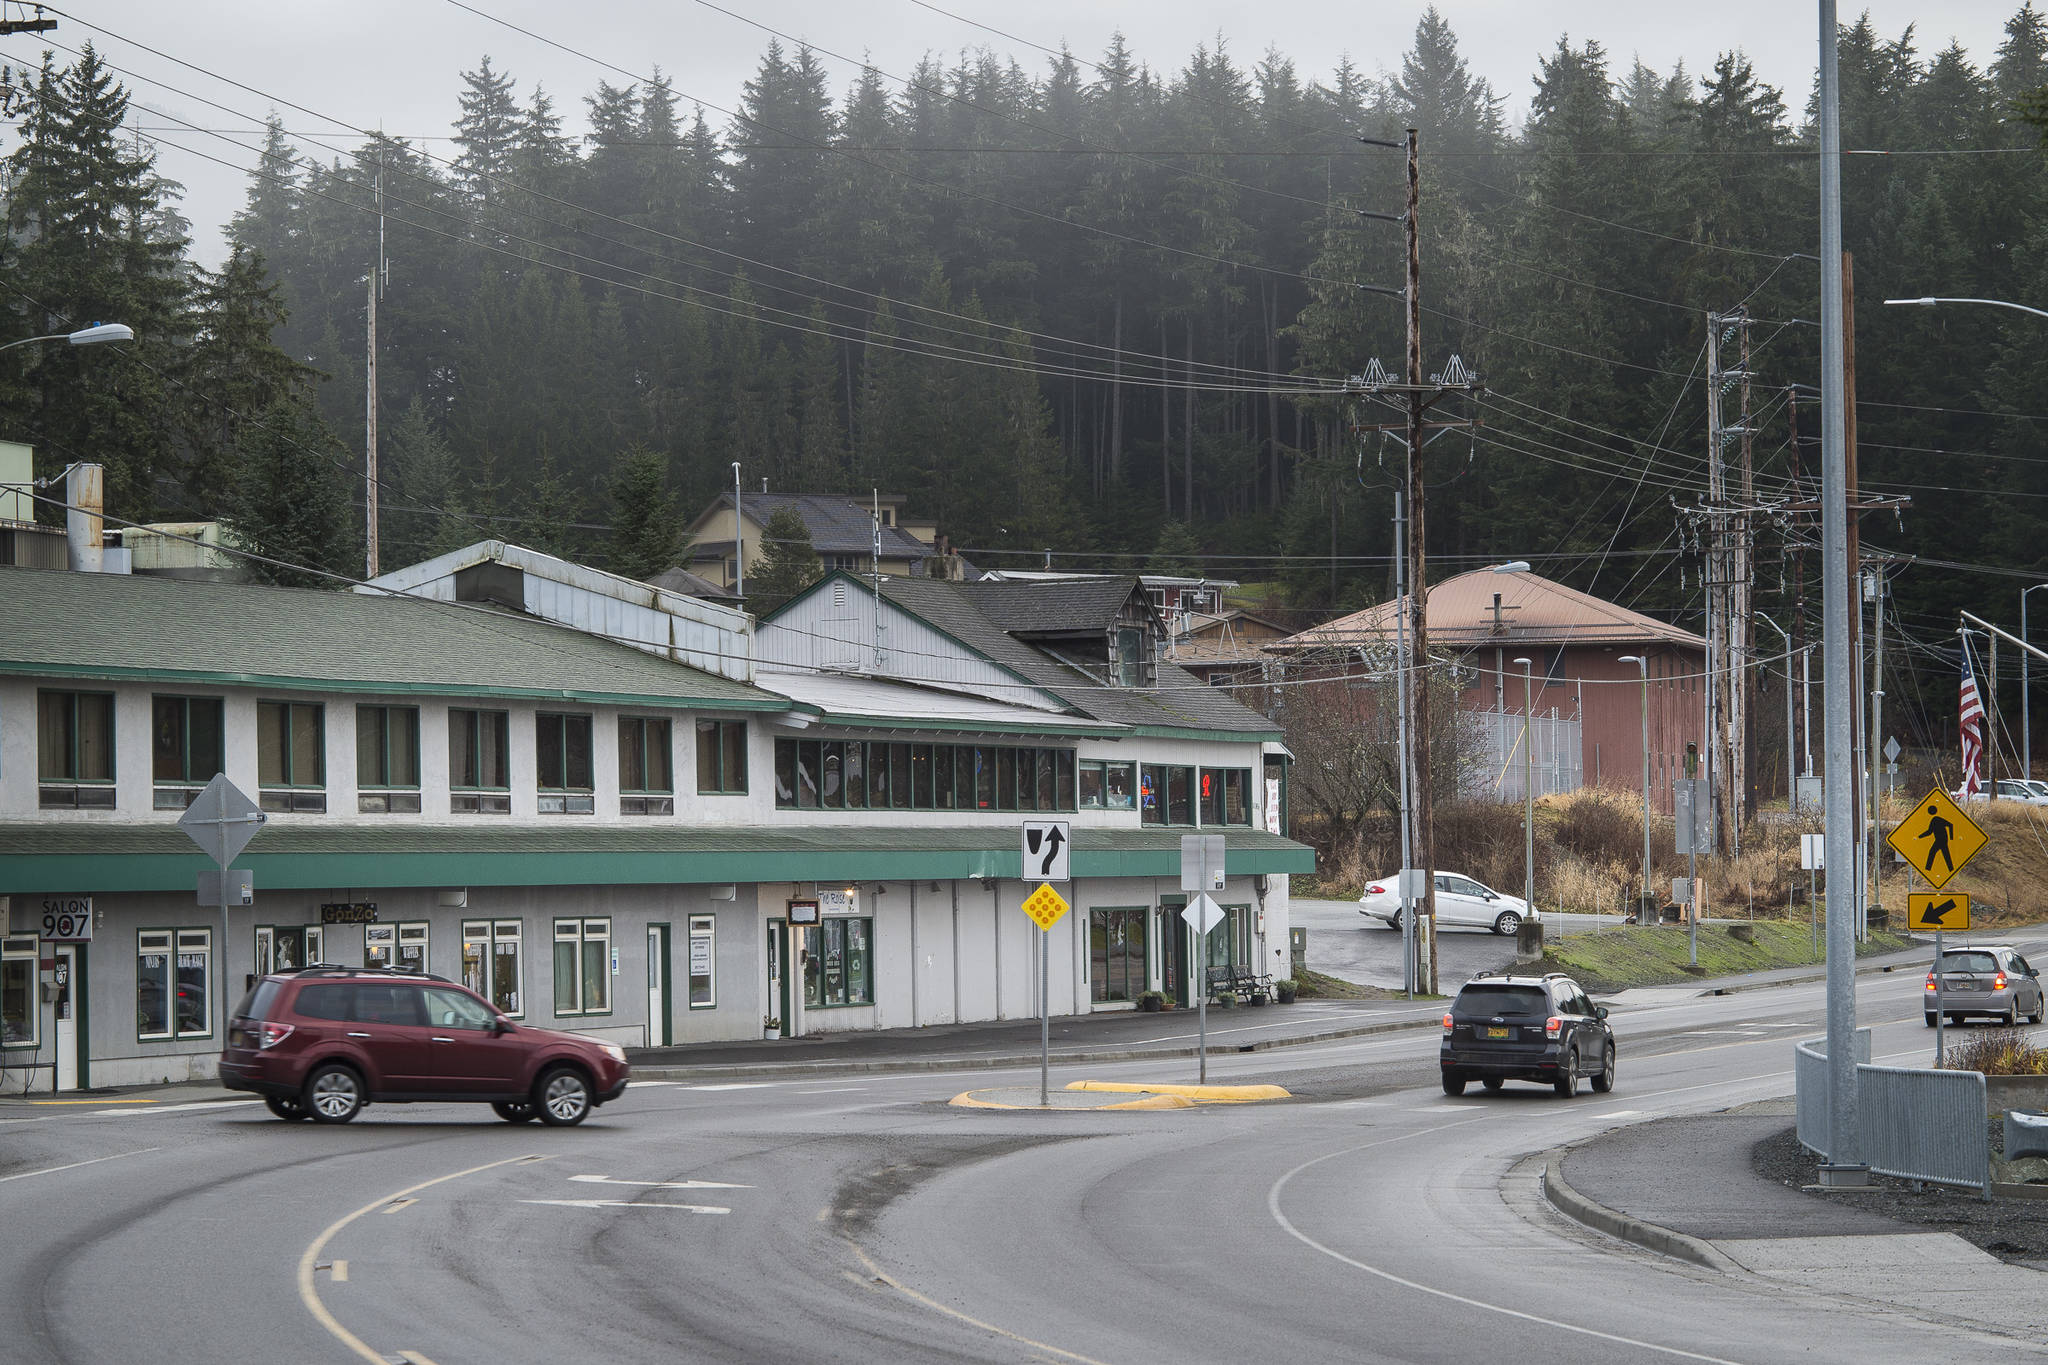 Businesses, schools, churches and public facilities line Veterans Memorial Highway running through Auke Bay on Wednesday, Nov. 28, 2018. The Planning Commission’s Auke Bay Implementation Committee is in the midst of drafting an ordinance to create a Community Mixed Use zoning district and an Auke Bay Overlay district. (Michael Penn | Juneau Empire)